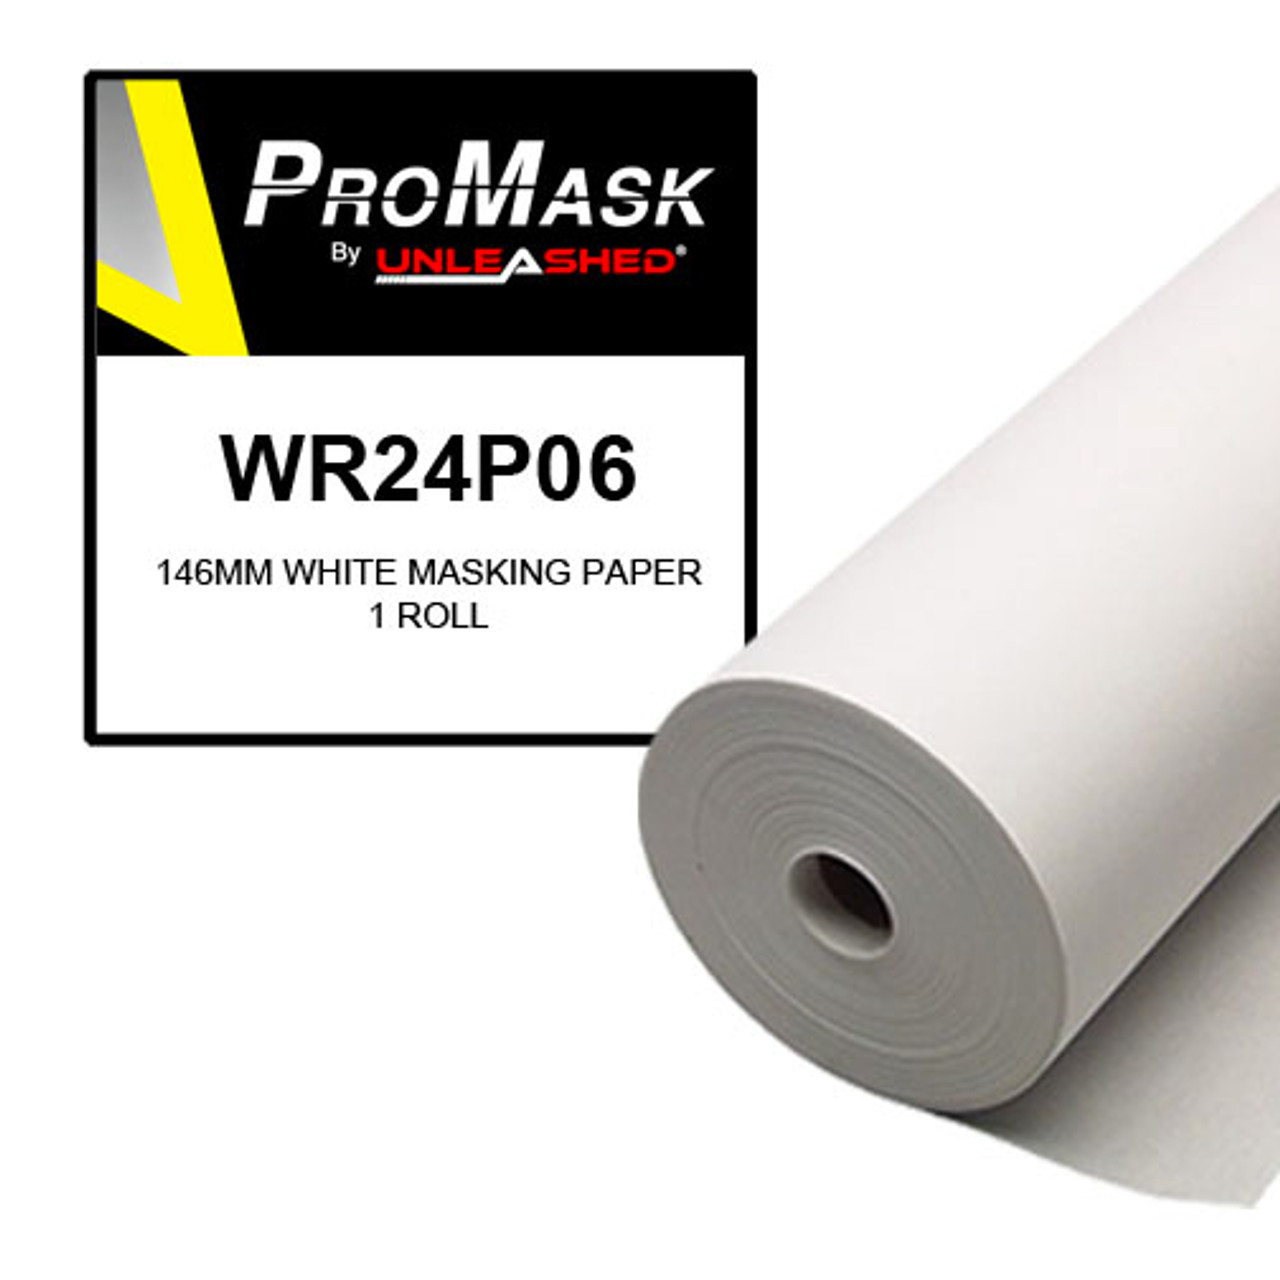 ProMask WR24P06 6" White Masking Paper Roll